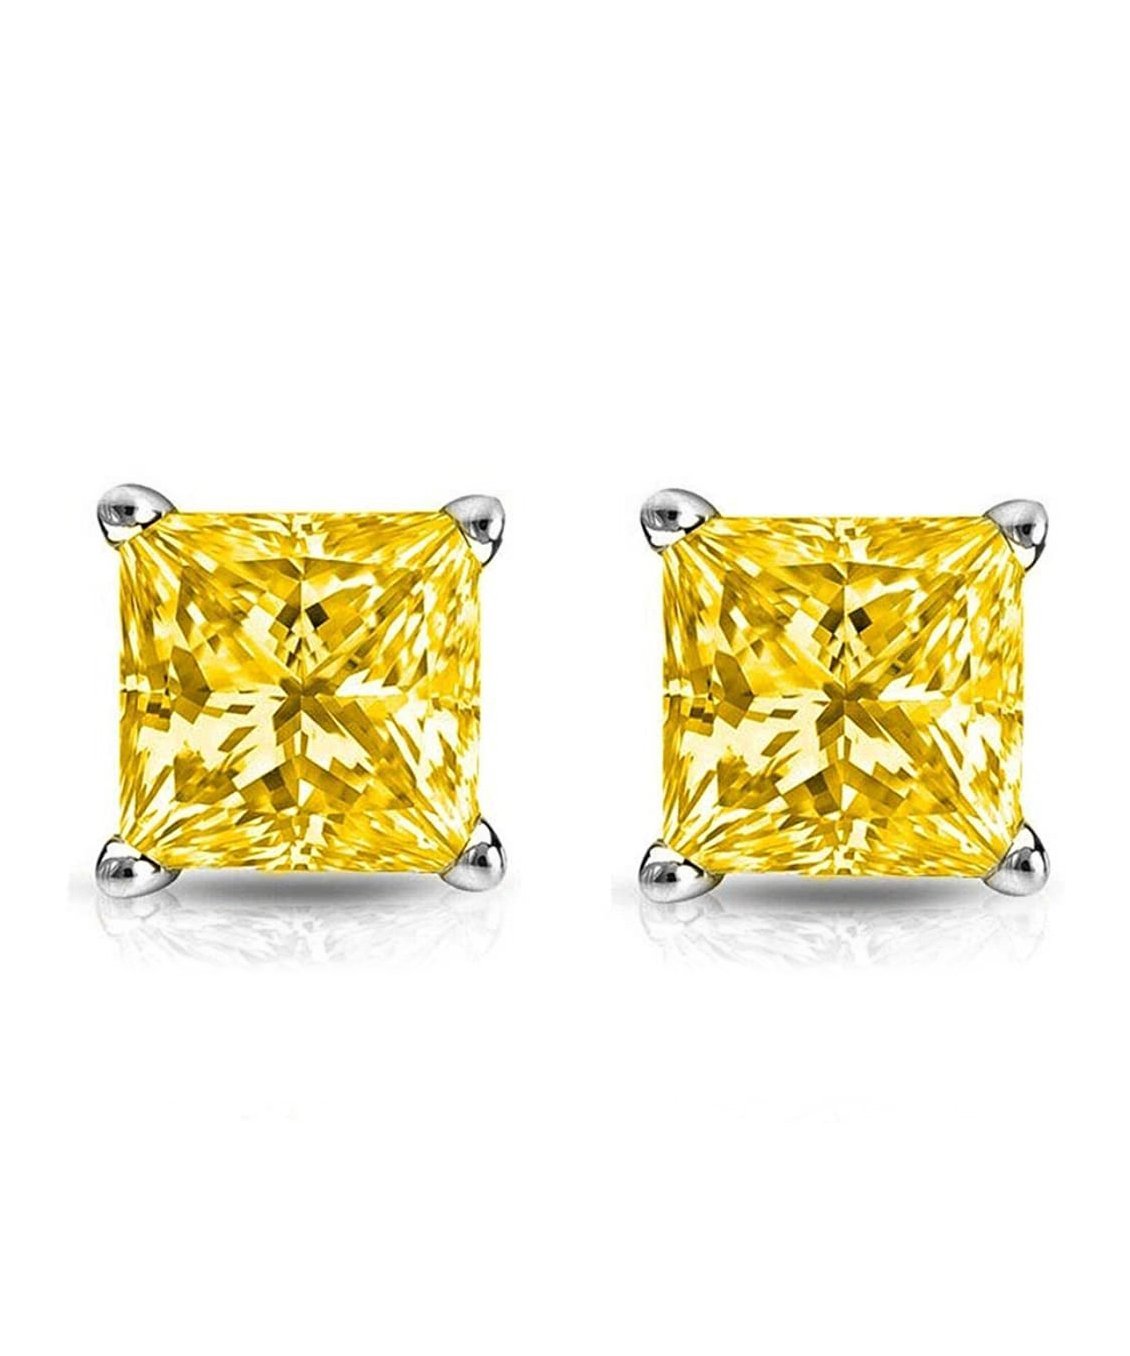 6mm Princess Stud Earring With Austrian Crystals -Yellow in 18K White Gold Plated ITALY Design Elsy Style Earring